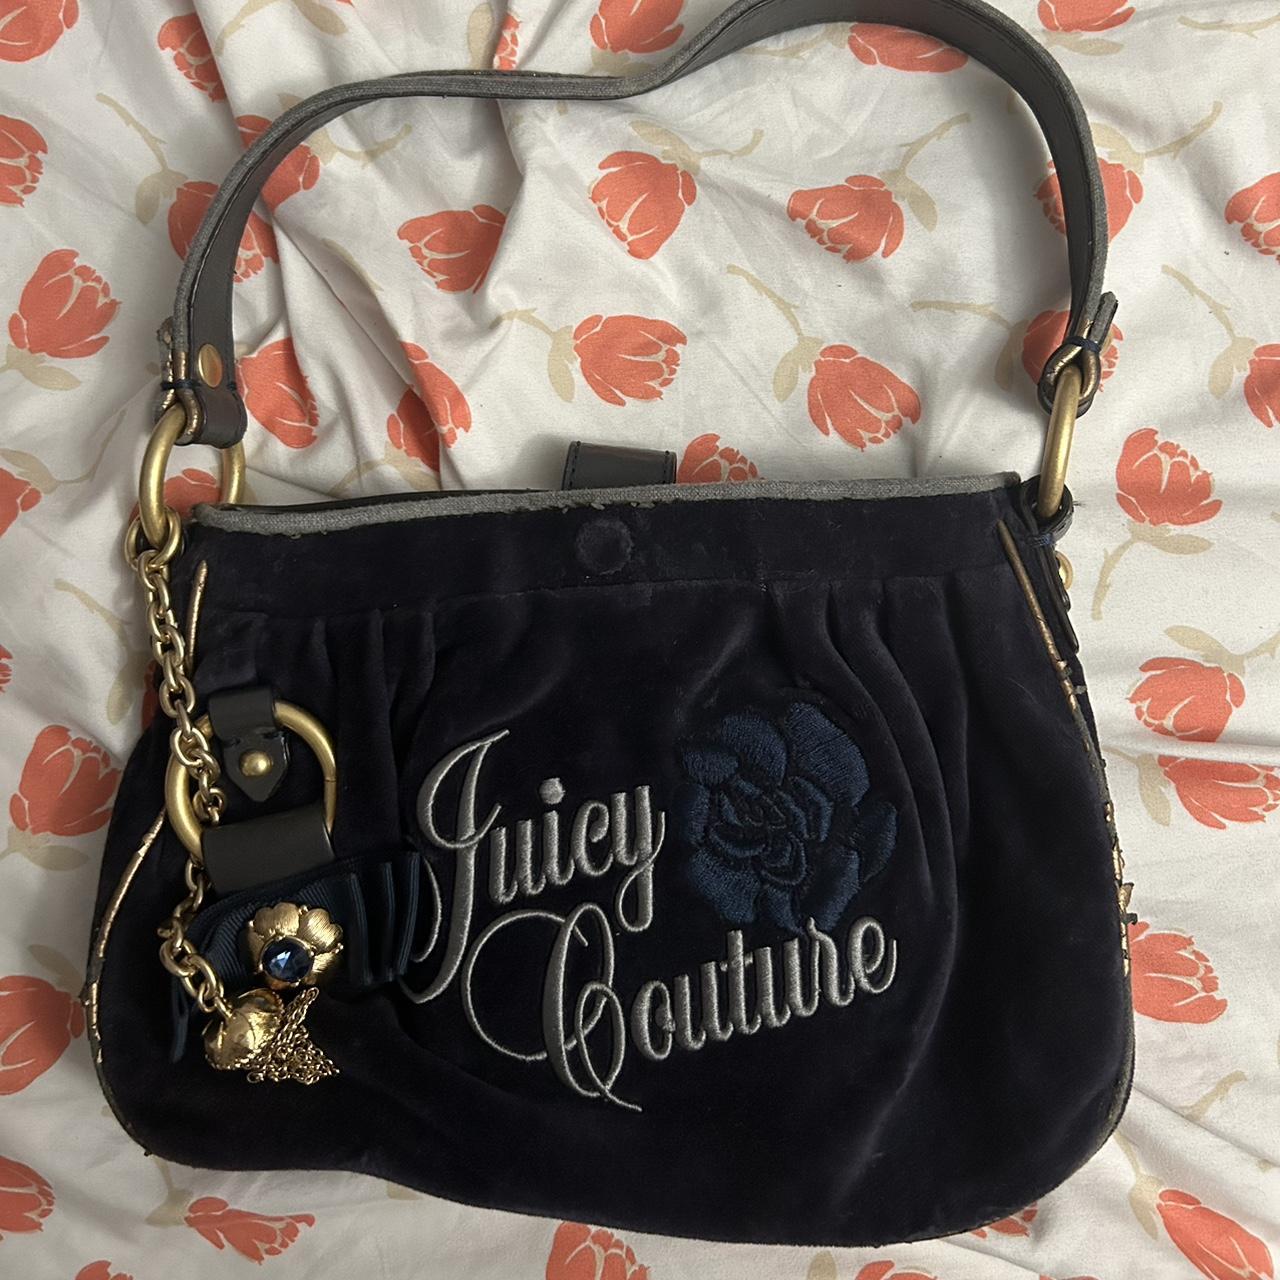 juicy couture blue lining bag｜TikTok Search